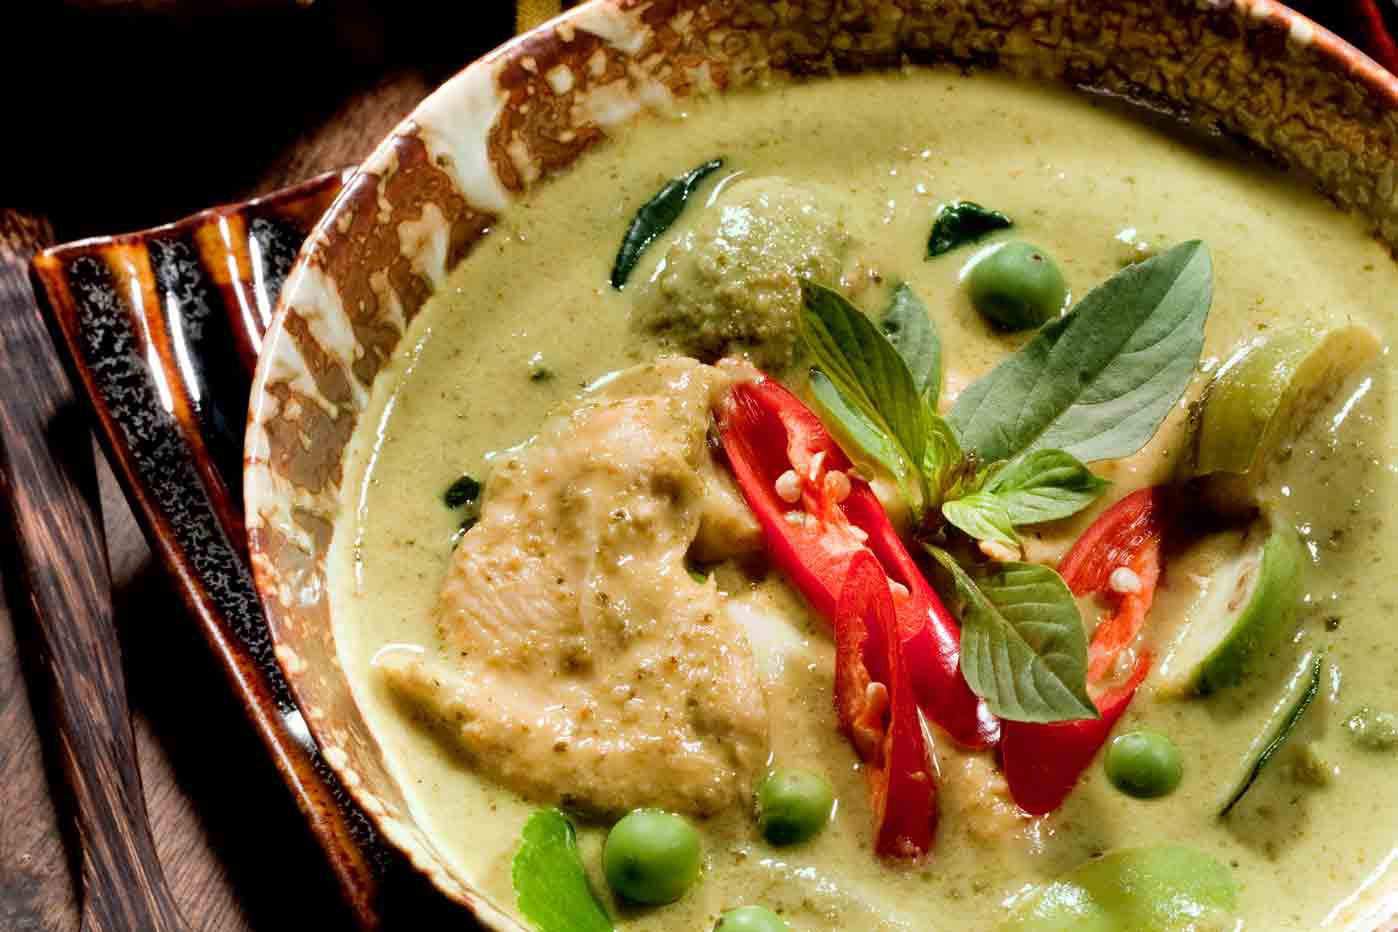 🌶 Only a Person Who Can Handle the Heat Will Have Eaten 13/25 of These Spicy Foods Thai green curry